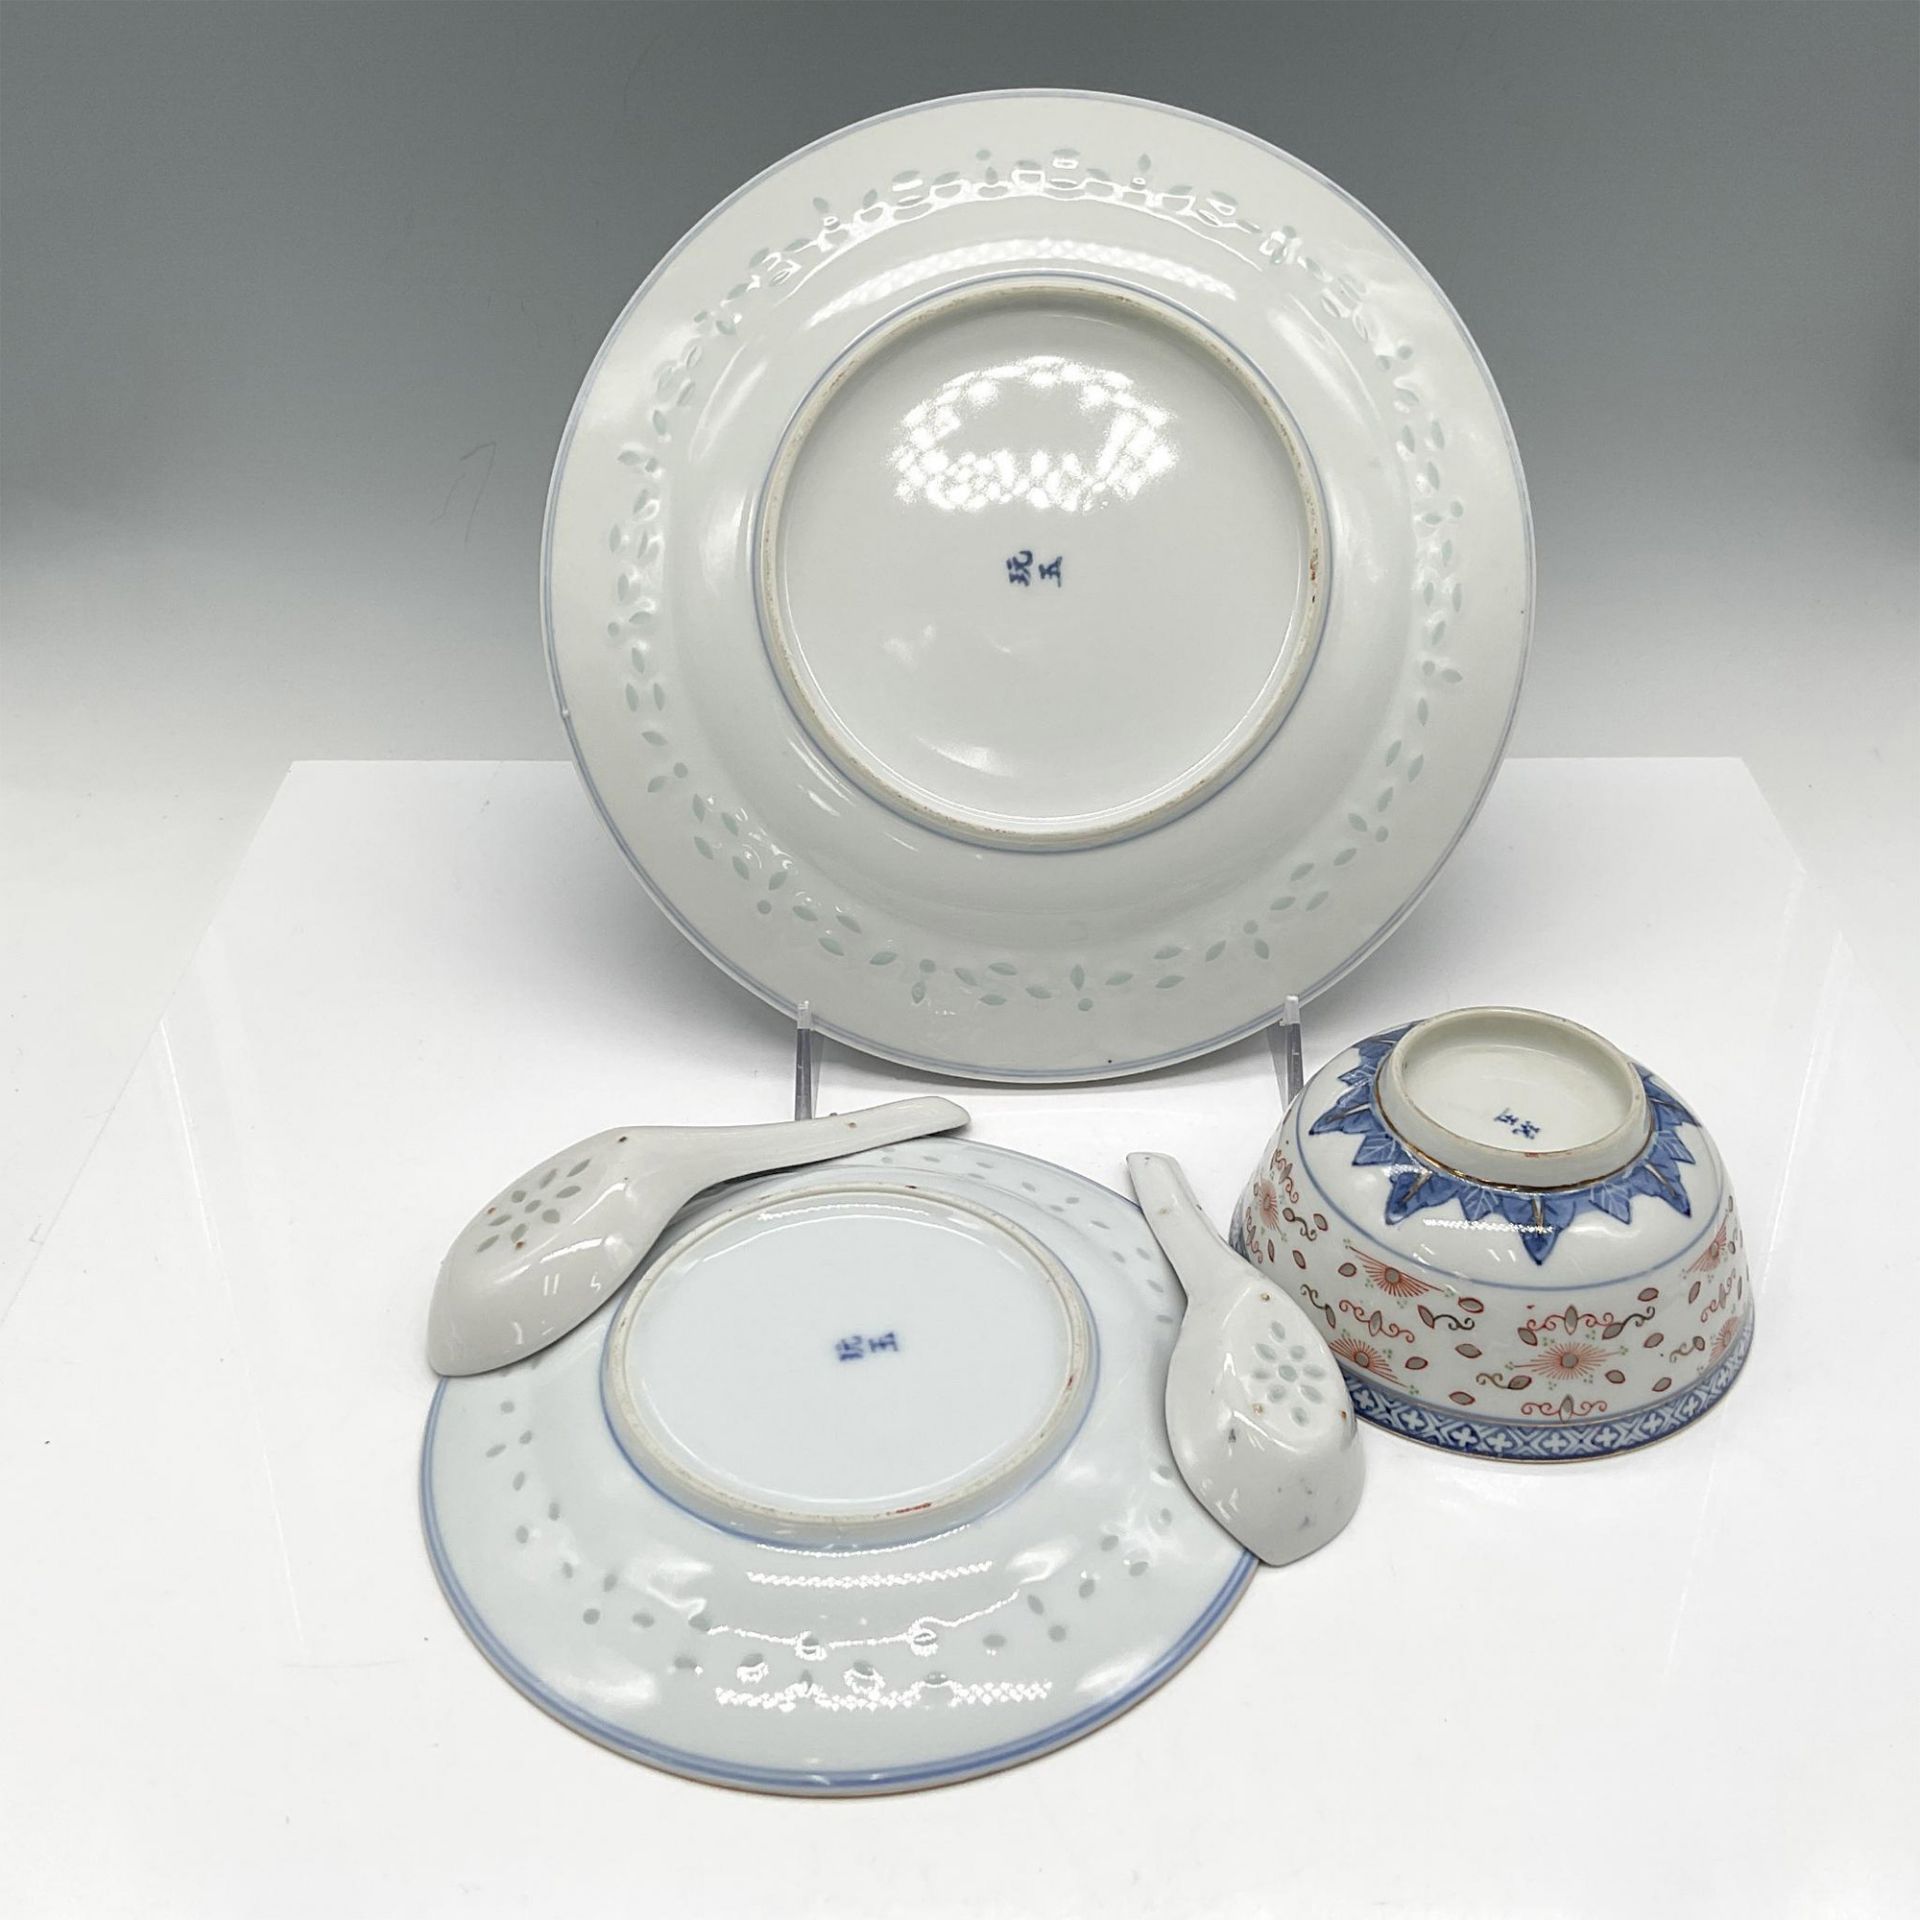 5pc Chinese Porcelain Blue Dragon Server Ware - Image 3 of 3